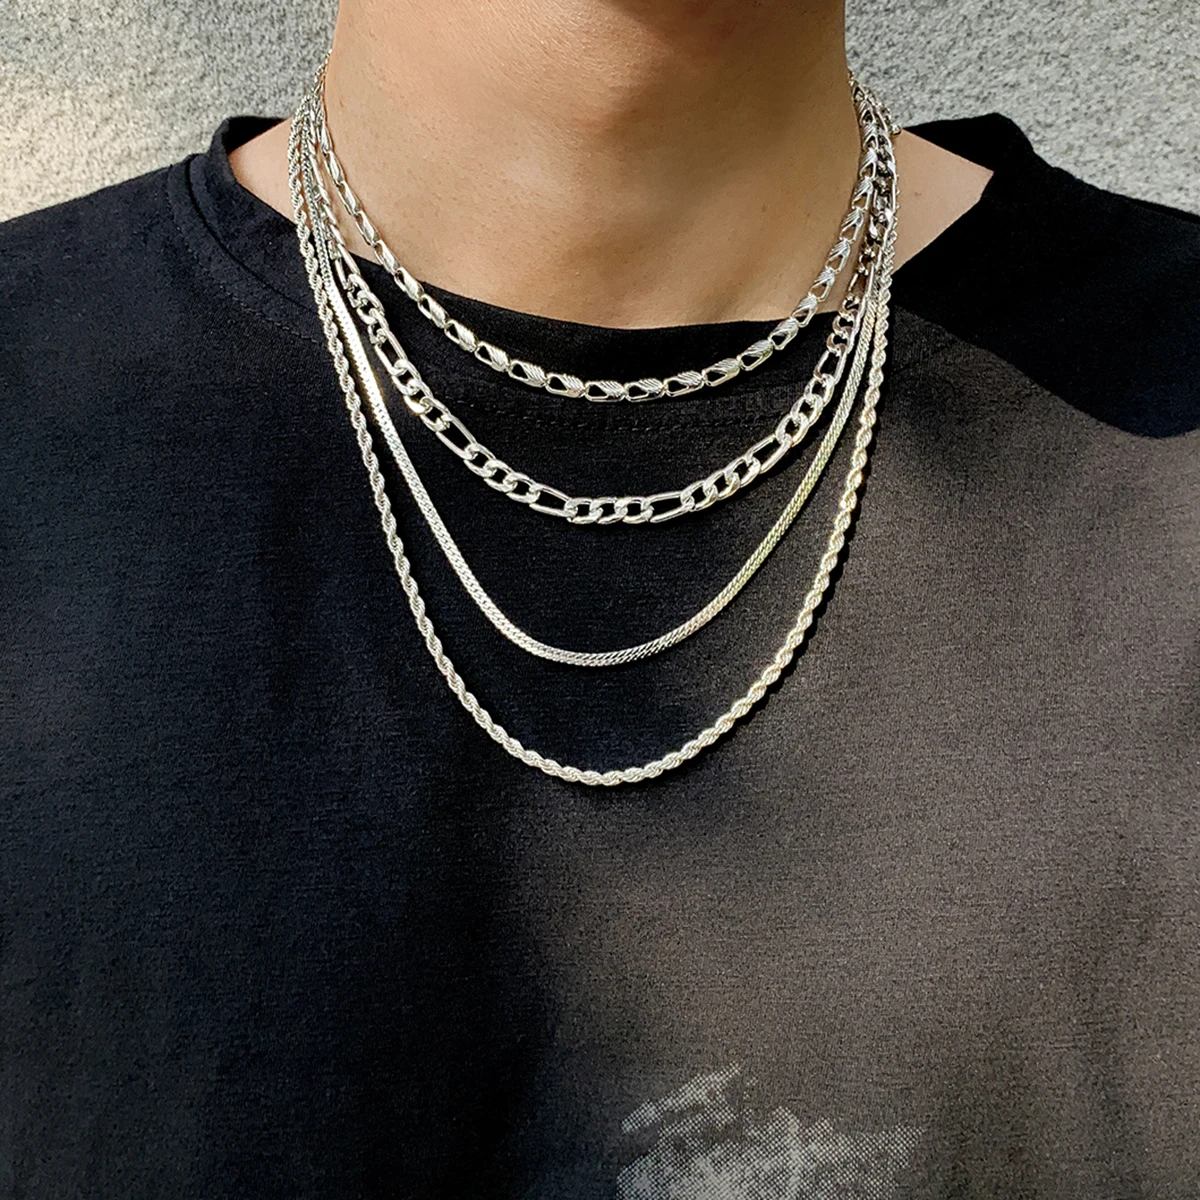 

SHIXIN Punk Separable Twisted Chain Necklaces for Women Men Simple Layered Choker Collar Necklace on the Neck Jewelry 2021 Gifts